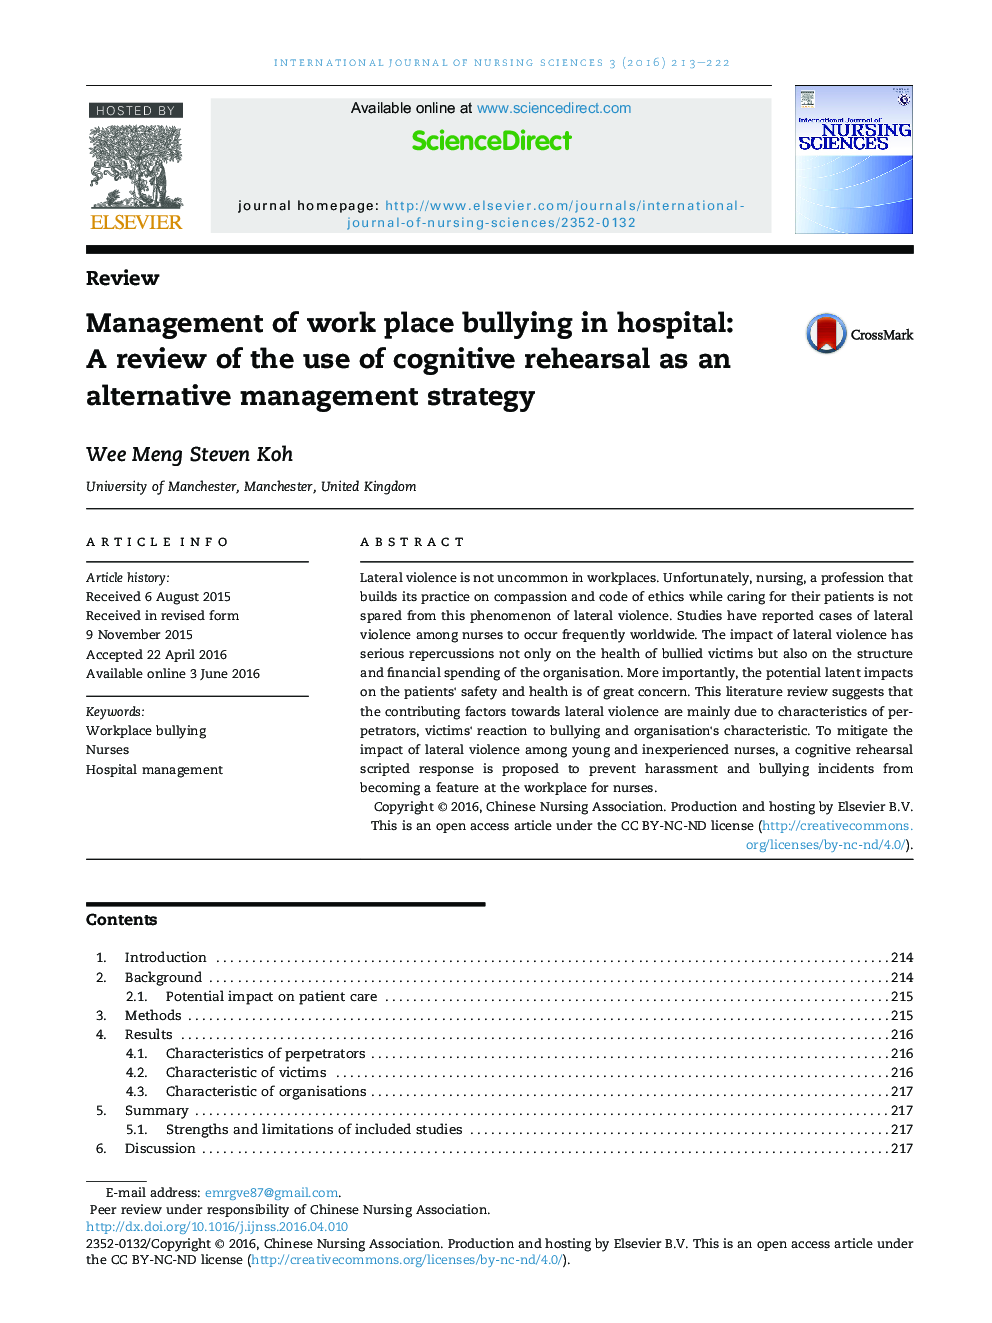 Management of work place bullying in hospital: A review of the use of cognitive rehearsal as an alternative management strategy 